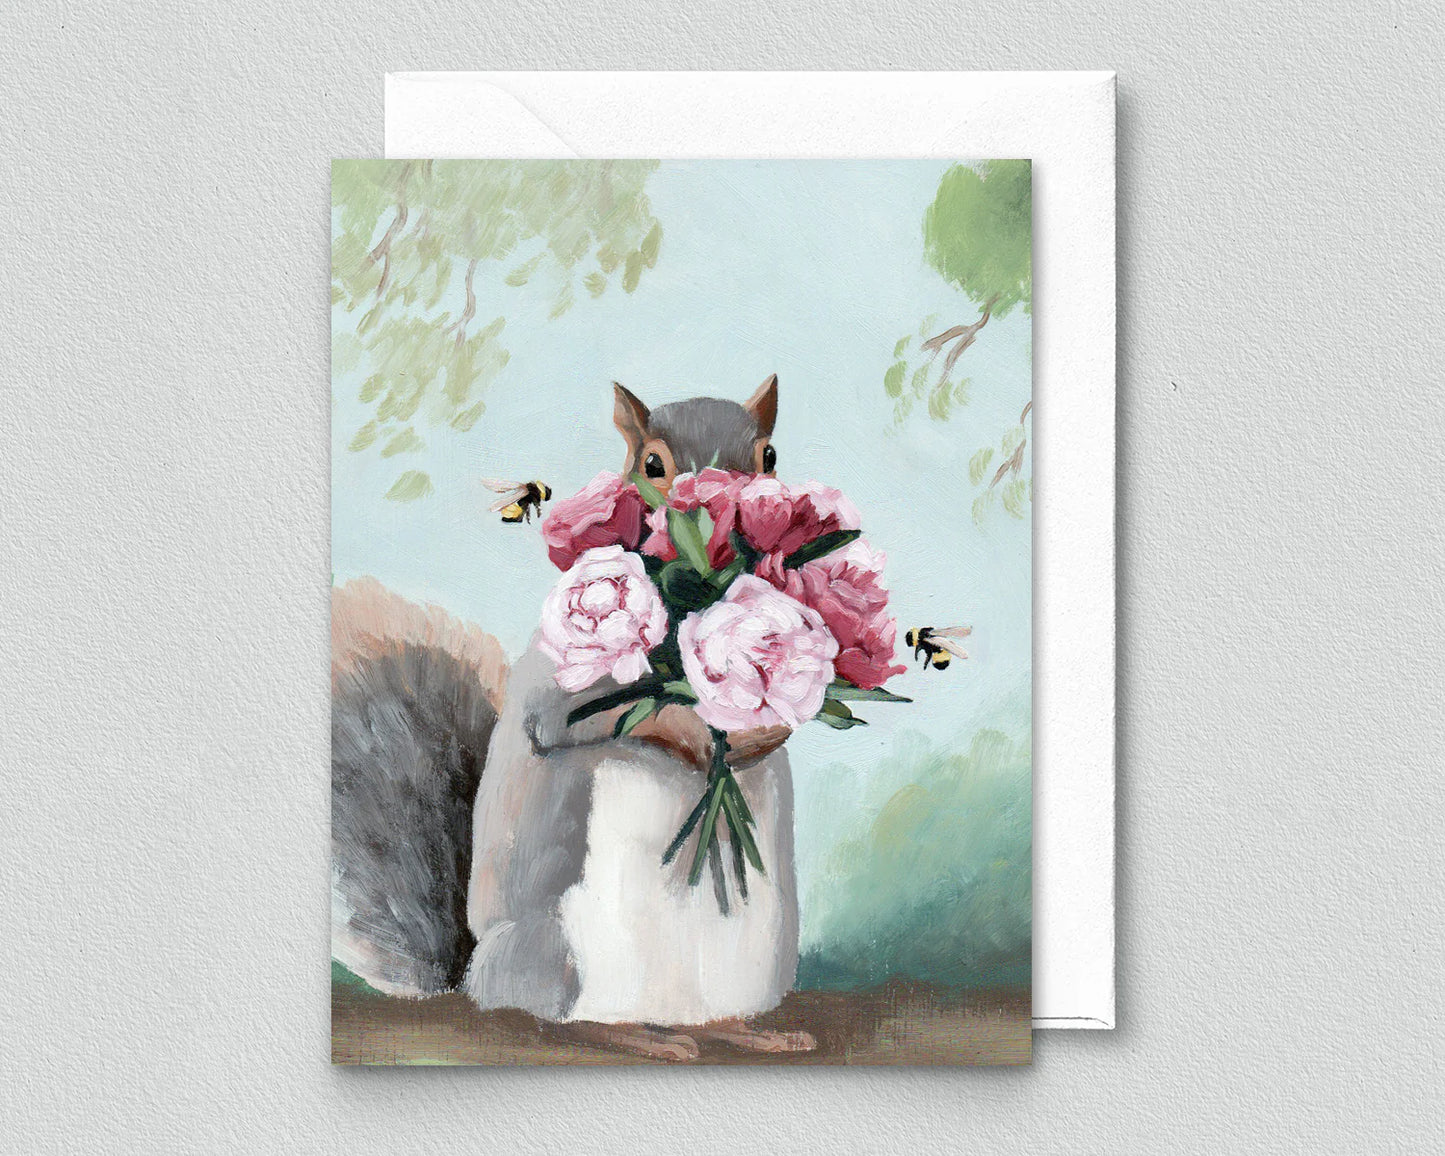 Squirrel with Peonies Greeting Card (blank inside) by Kim Ferreira (Joie de Vivre)